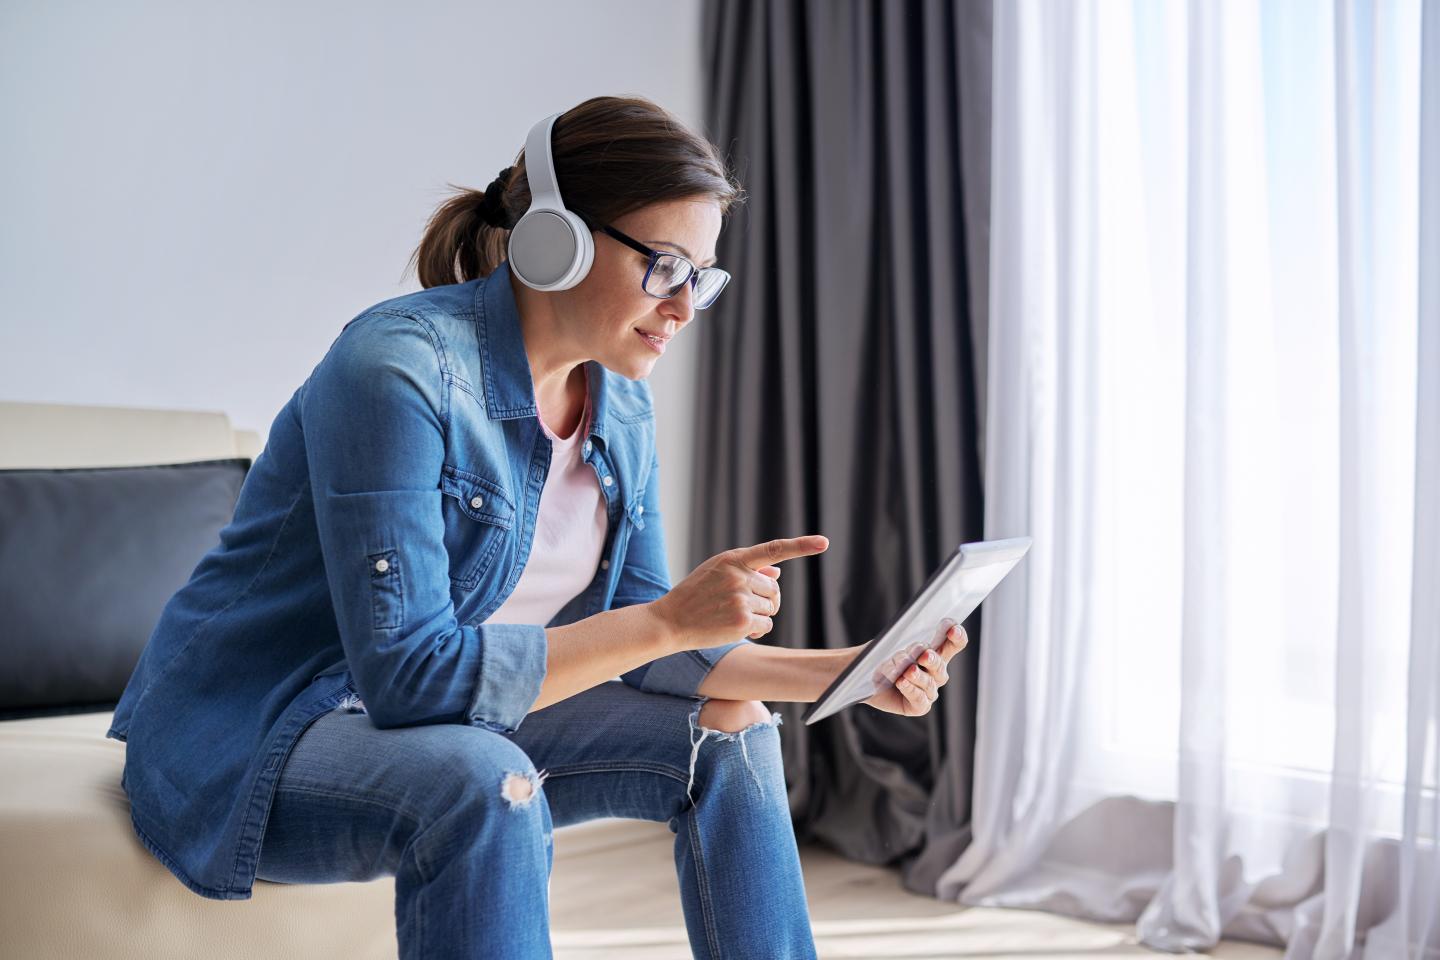 Woman wearing denim and headphones interacts with a tablet